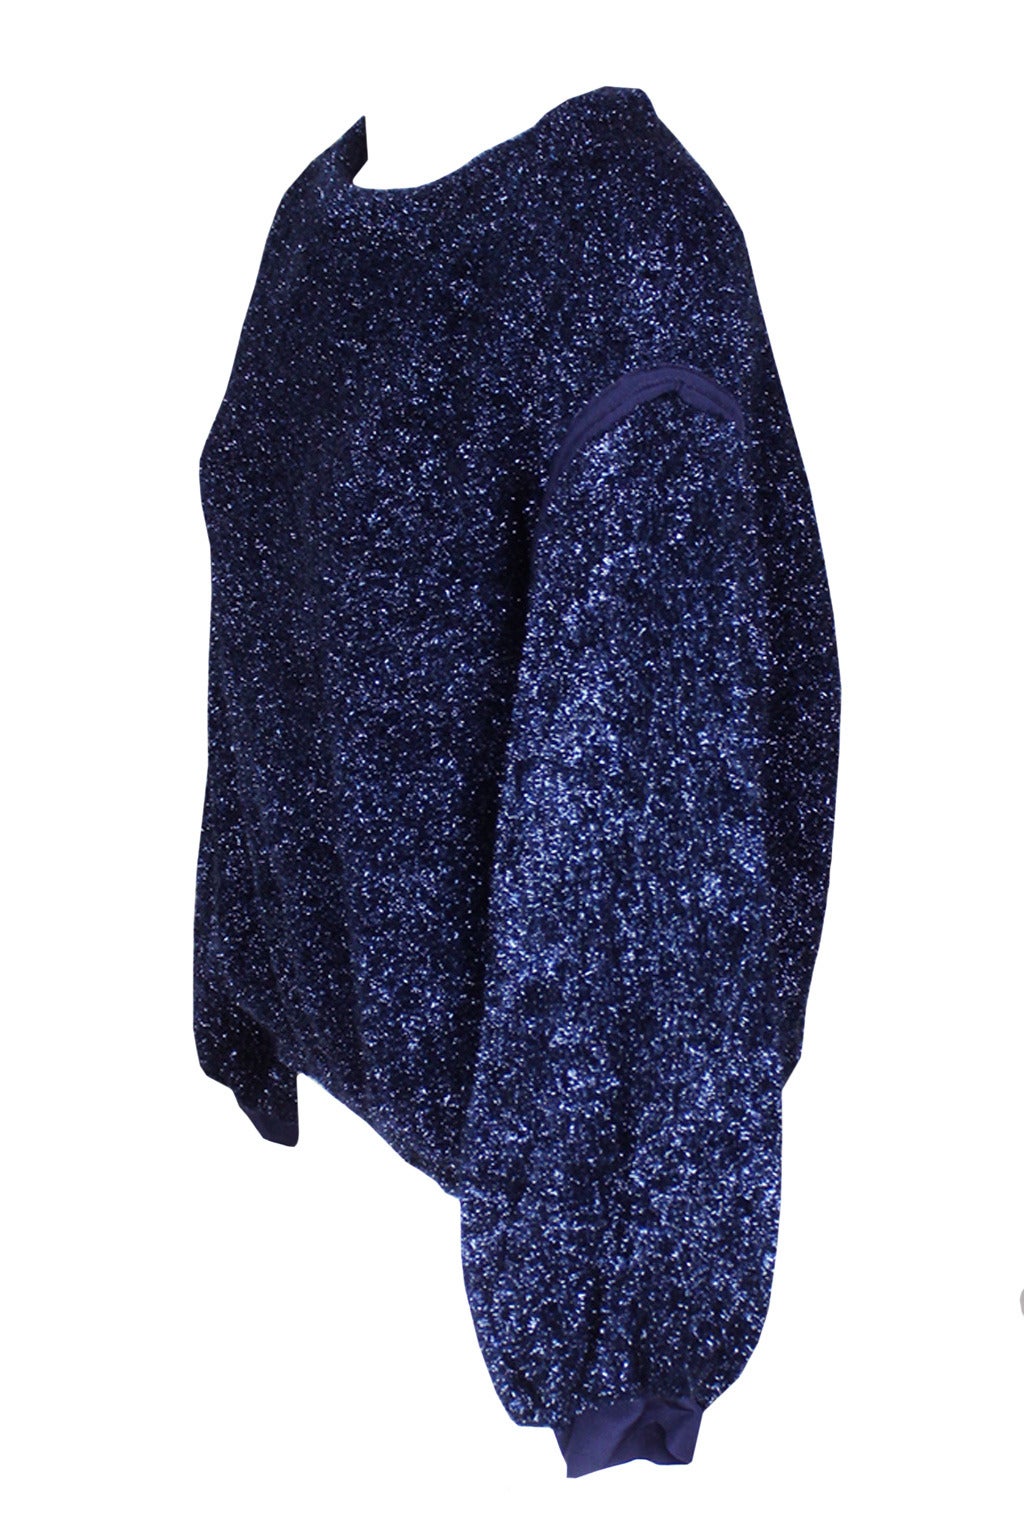 This festive crinkly sweater has a metallic finish in a deep blue hue. It has an elasticized waist and full elasticized sleeves with a knit cuff. This sweater is a fun garment that could work with jeans or be dressed up.